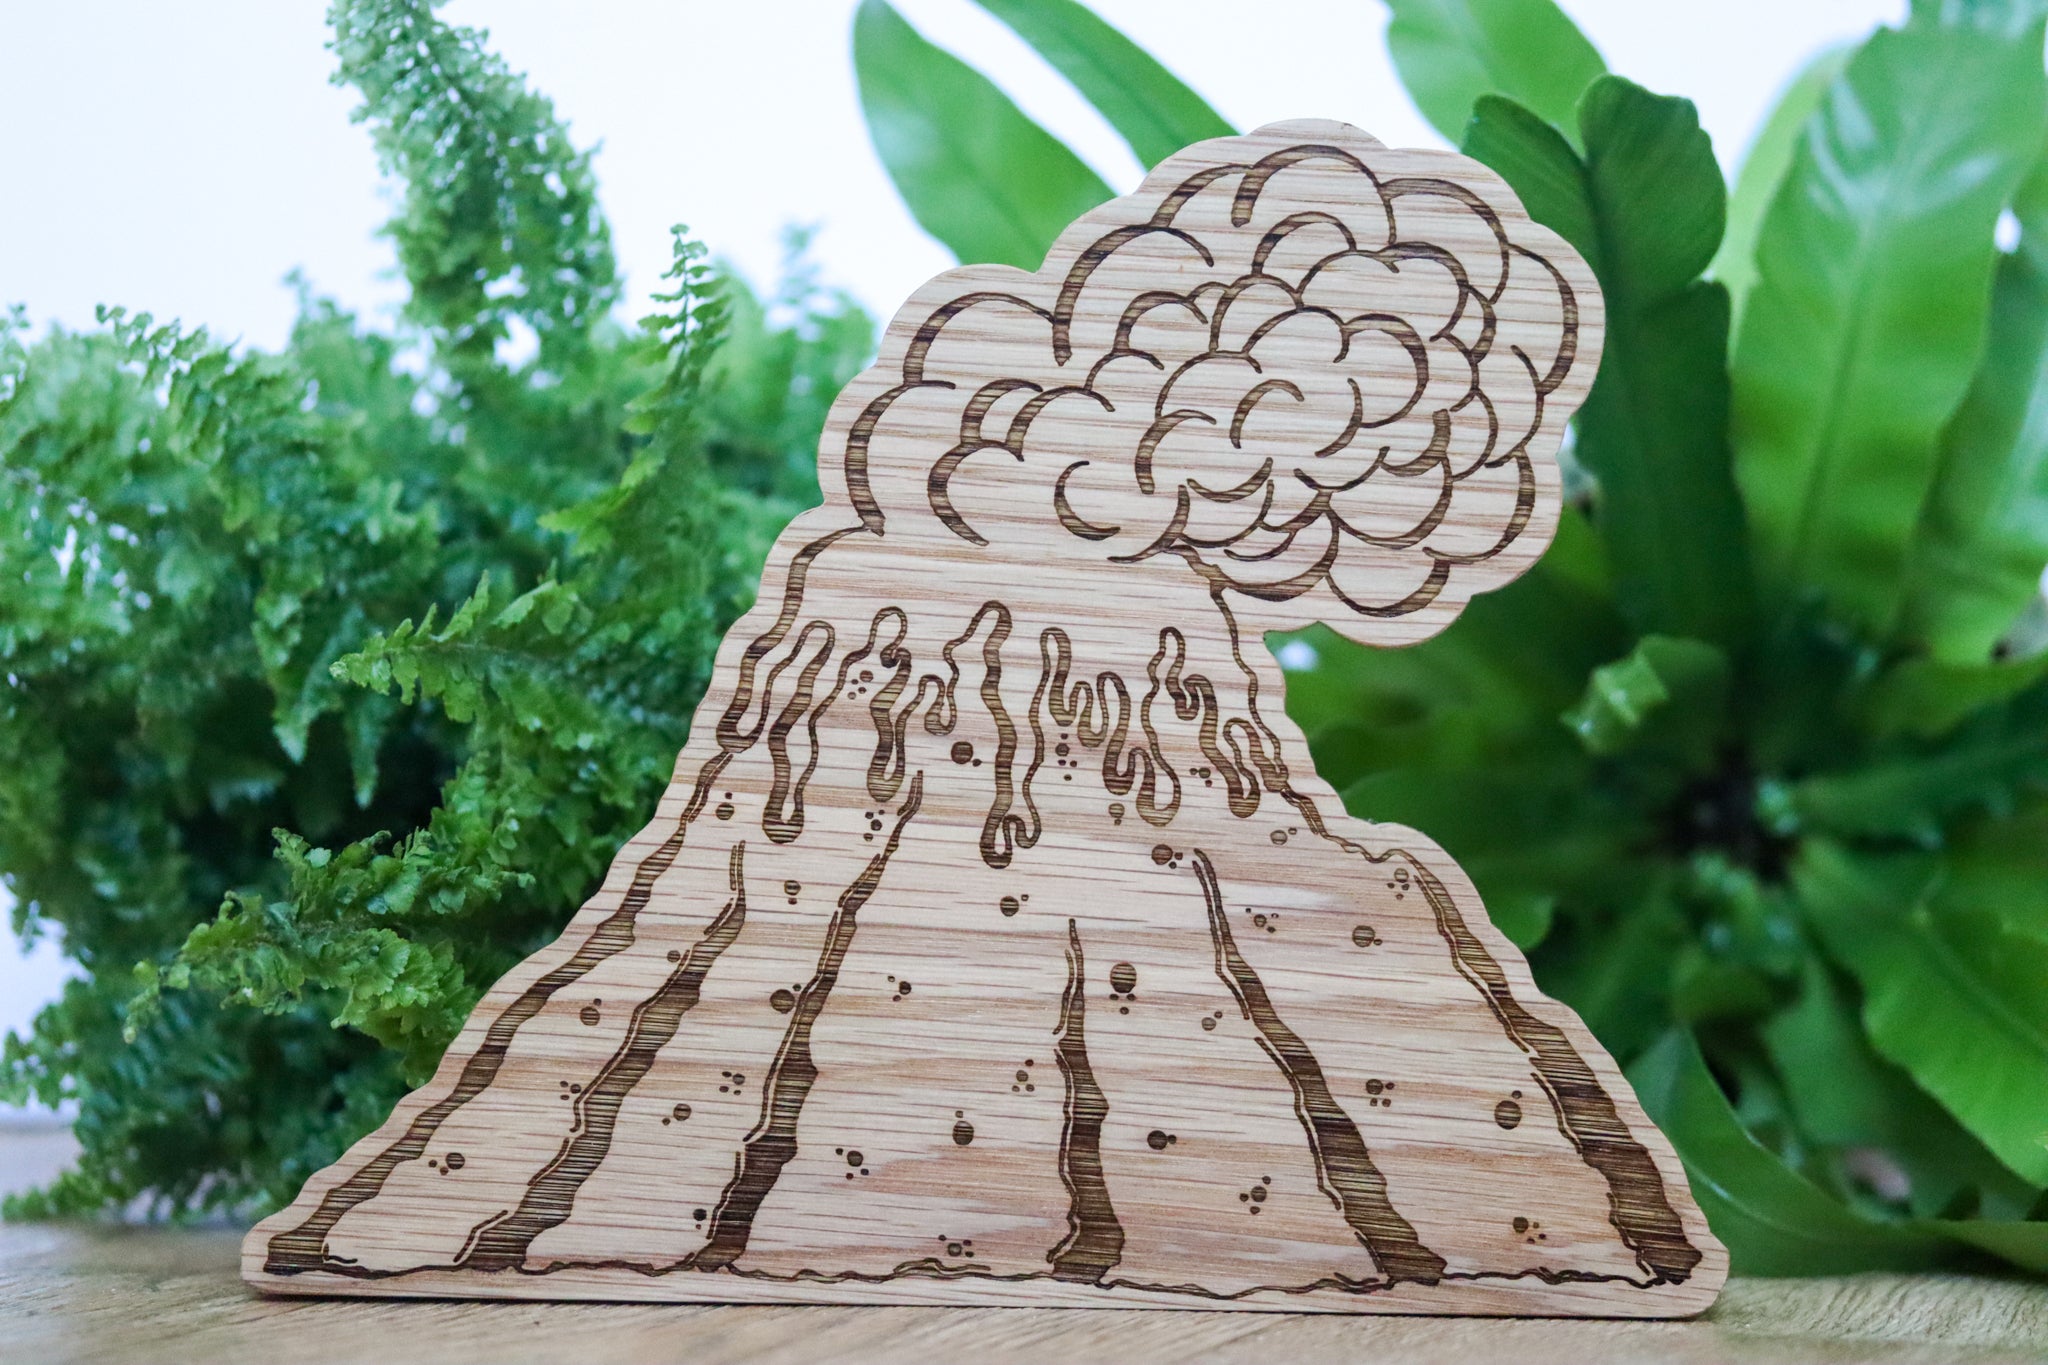 Wooden Oak lasered volcano with smoke cloud stood in front of two ferns on a wooden floor